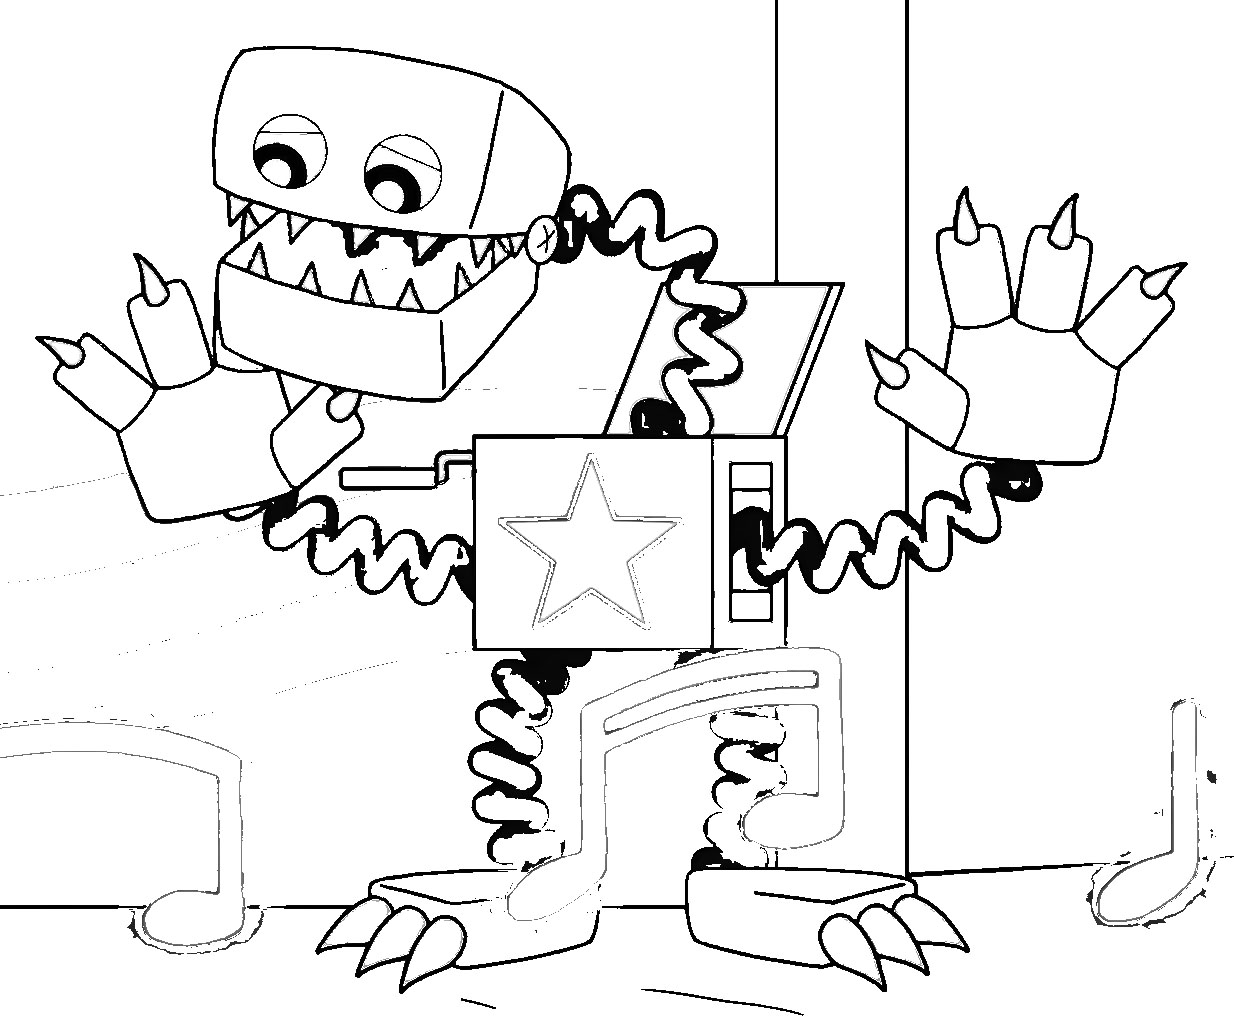 Boxy Boo coloring page 3 – Having fun with children